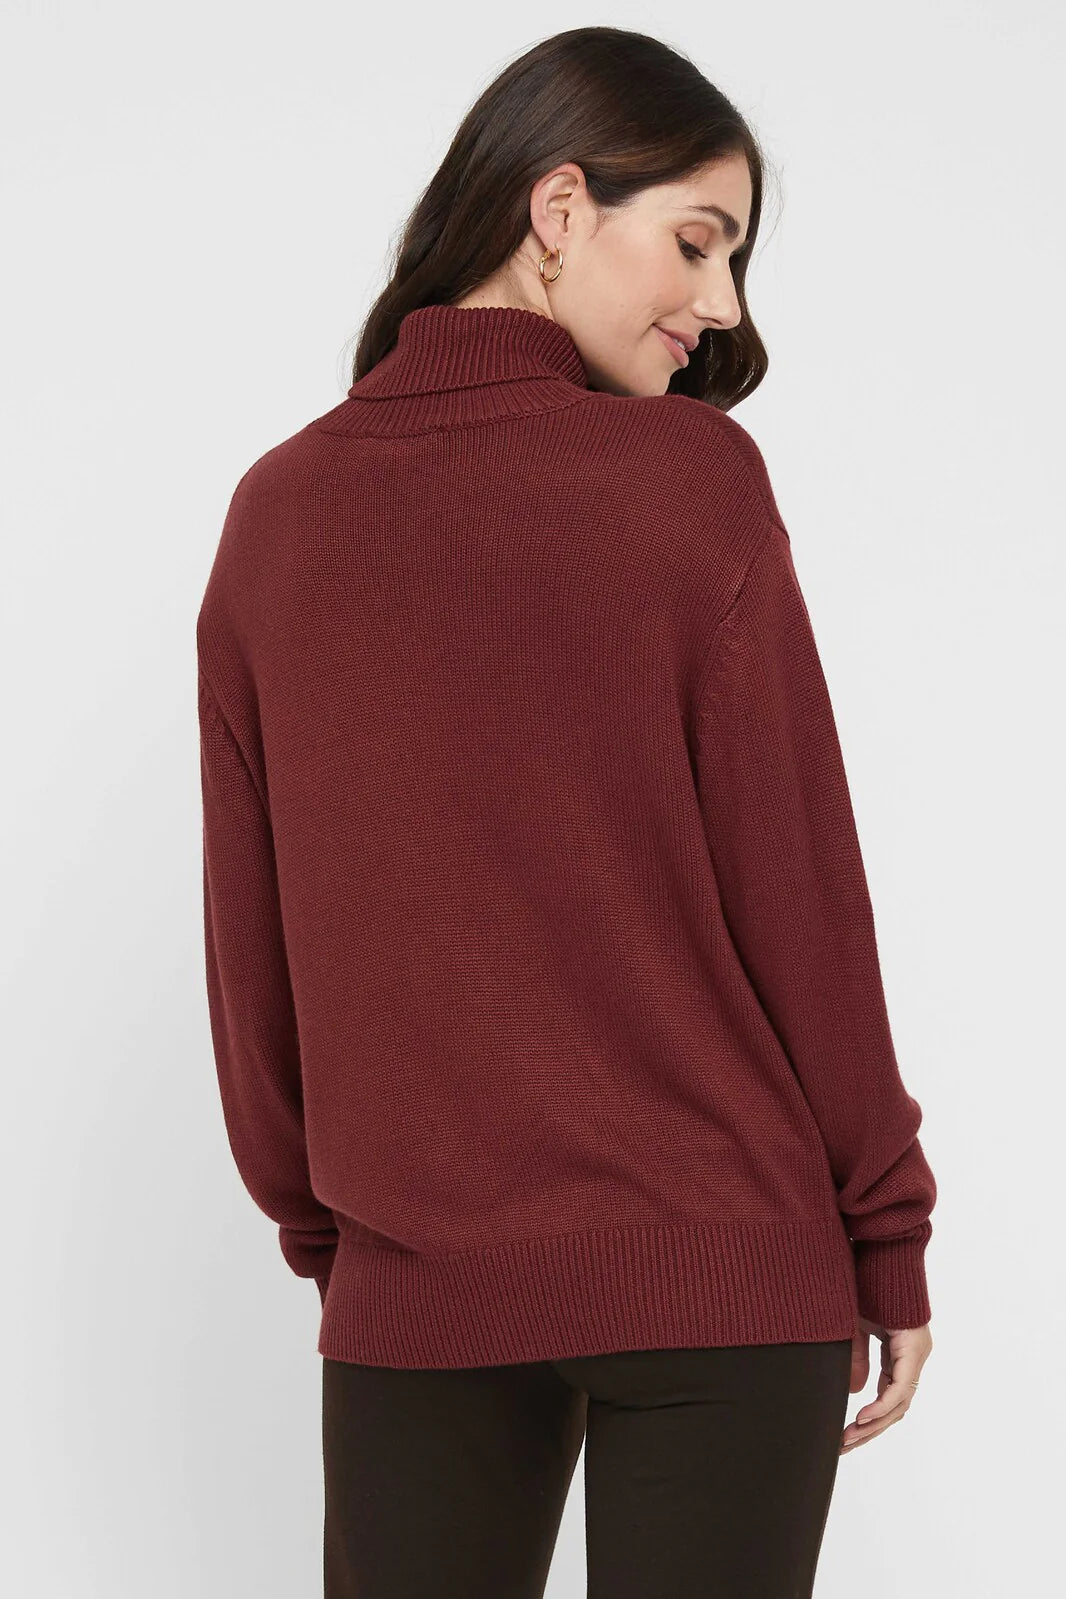 "Soft bamboo turtle neck jumper: Elevate your eco-conscious wardrobe with sustainable fashion."